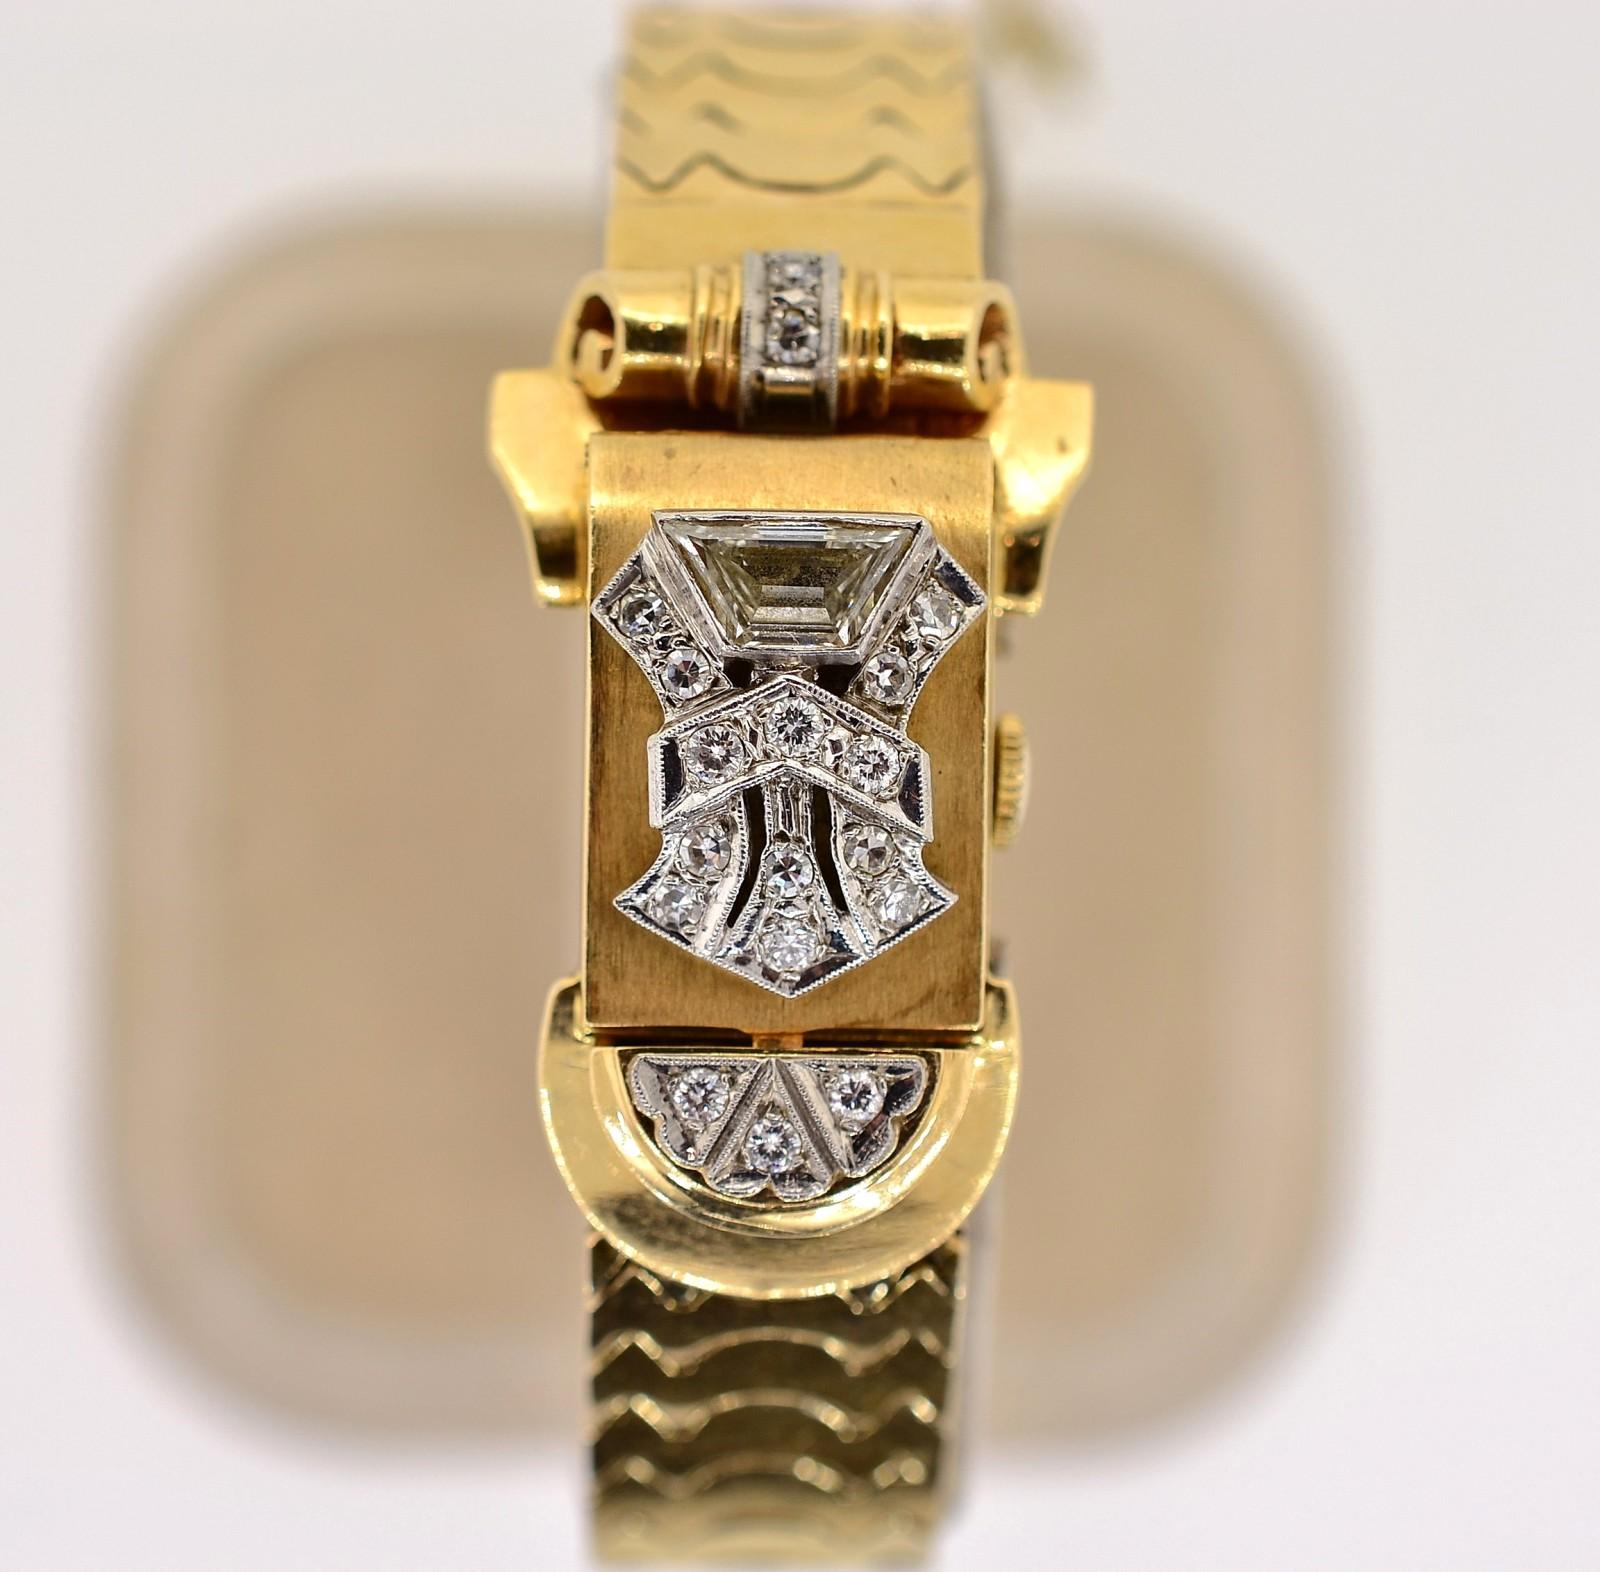 This Retro 1940s beauty was created in 14KT yellwo gold evoking the essence of the era.  The watch itself has a gold over enhanced with a sparkling Trapezoid cut Diamond weighing approx. 0.55 carat of H/I color - VS clarity.  Single cut Diamonds set